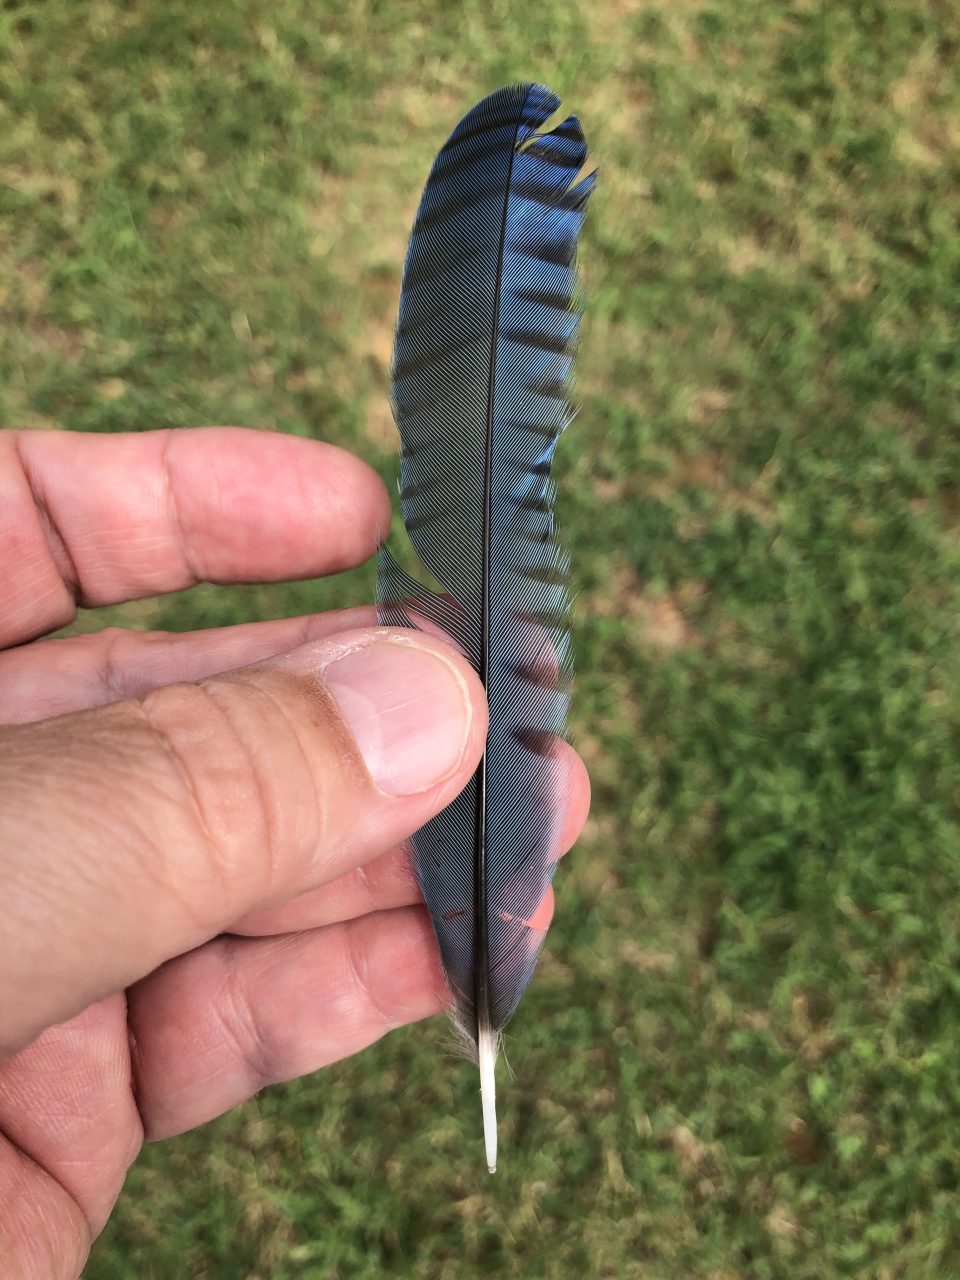 Found feather from a blue jay. Under federal law, this feather is protected and cannot be taken.